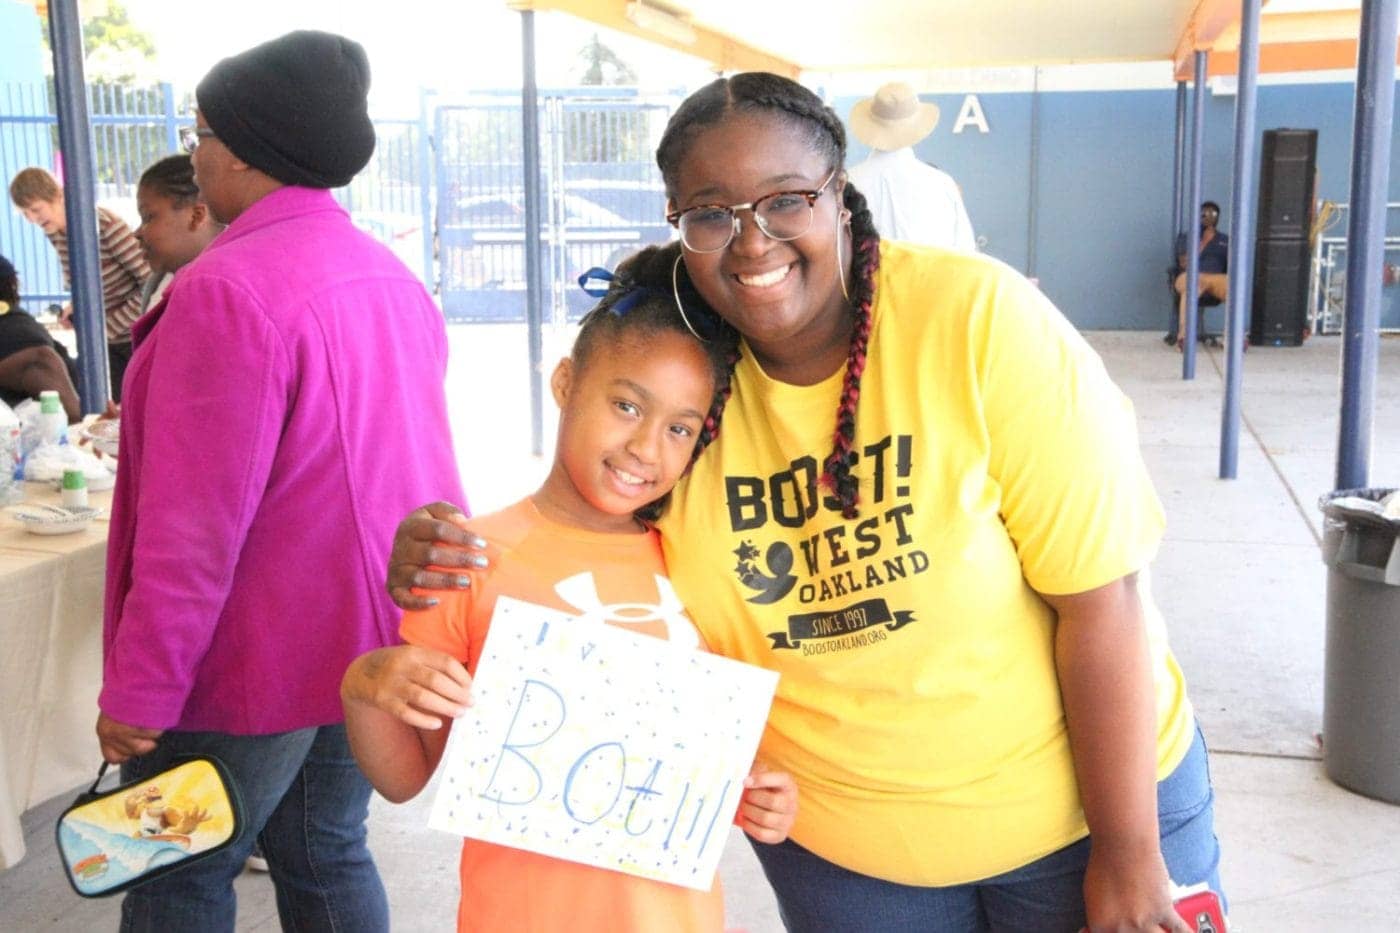 Boost-Executive-Director-Ty-Licia-Hooker-hugs-student-1400x933, <strong>Boost! West Oakland’s CEO Ty-Licia Hooker speaks on academic recovery after the pandemic lockdowns</strong>, Culture Currents Local News & Views 